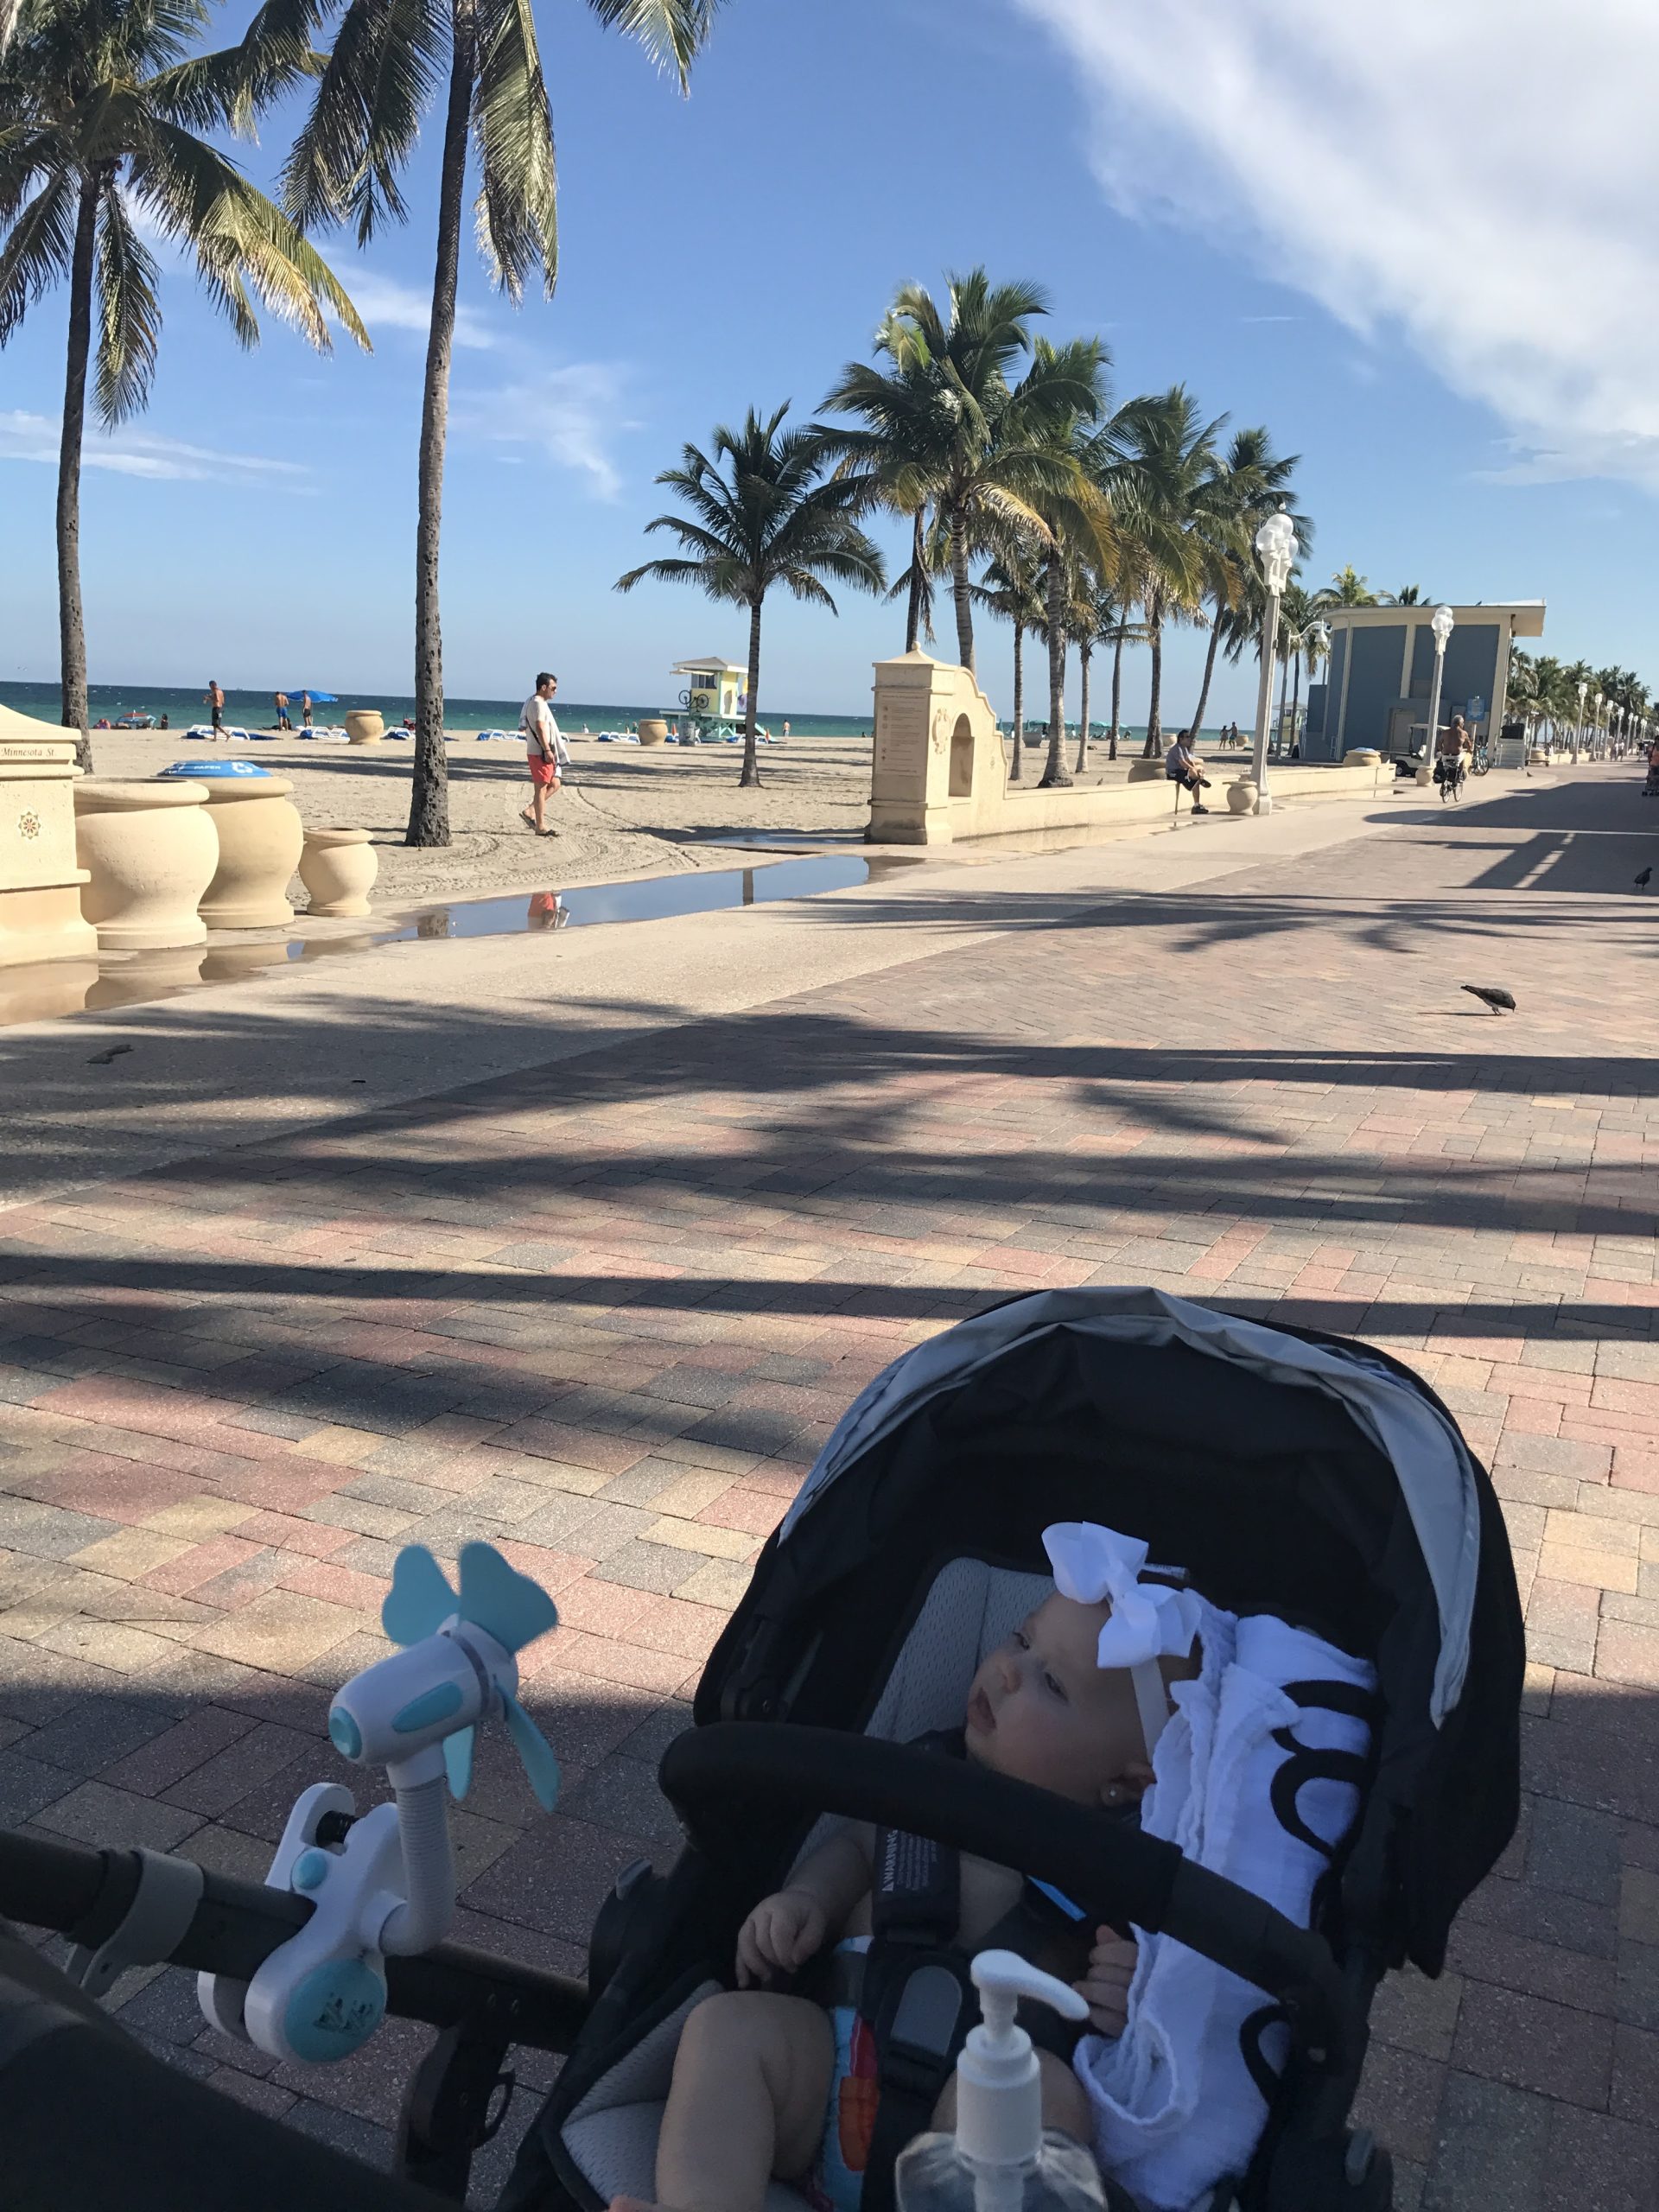 Image: An infant rides in a stroller along the boardwalk at Hollywood Beach